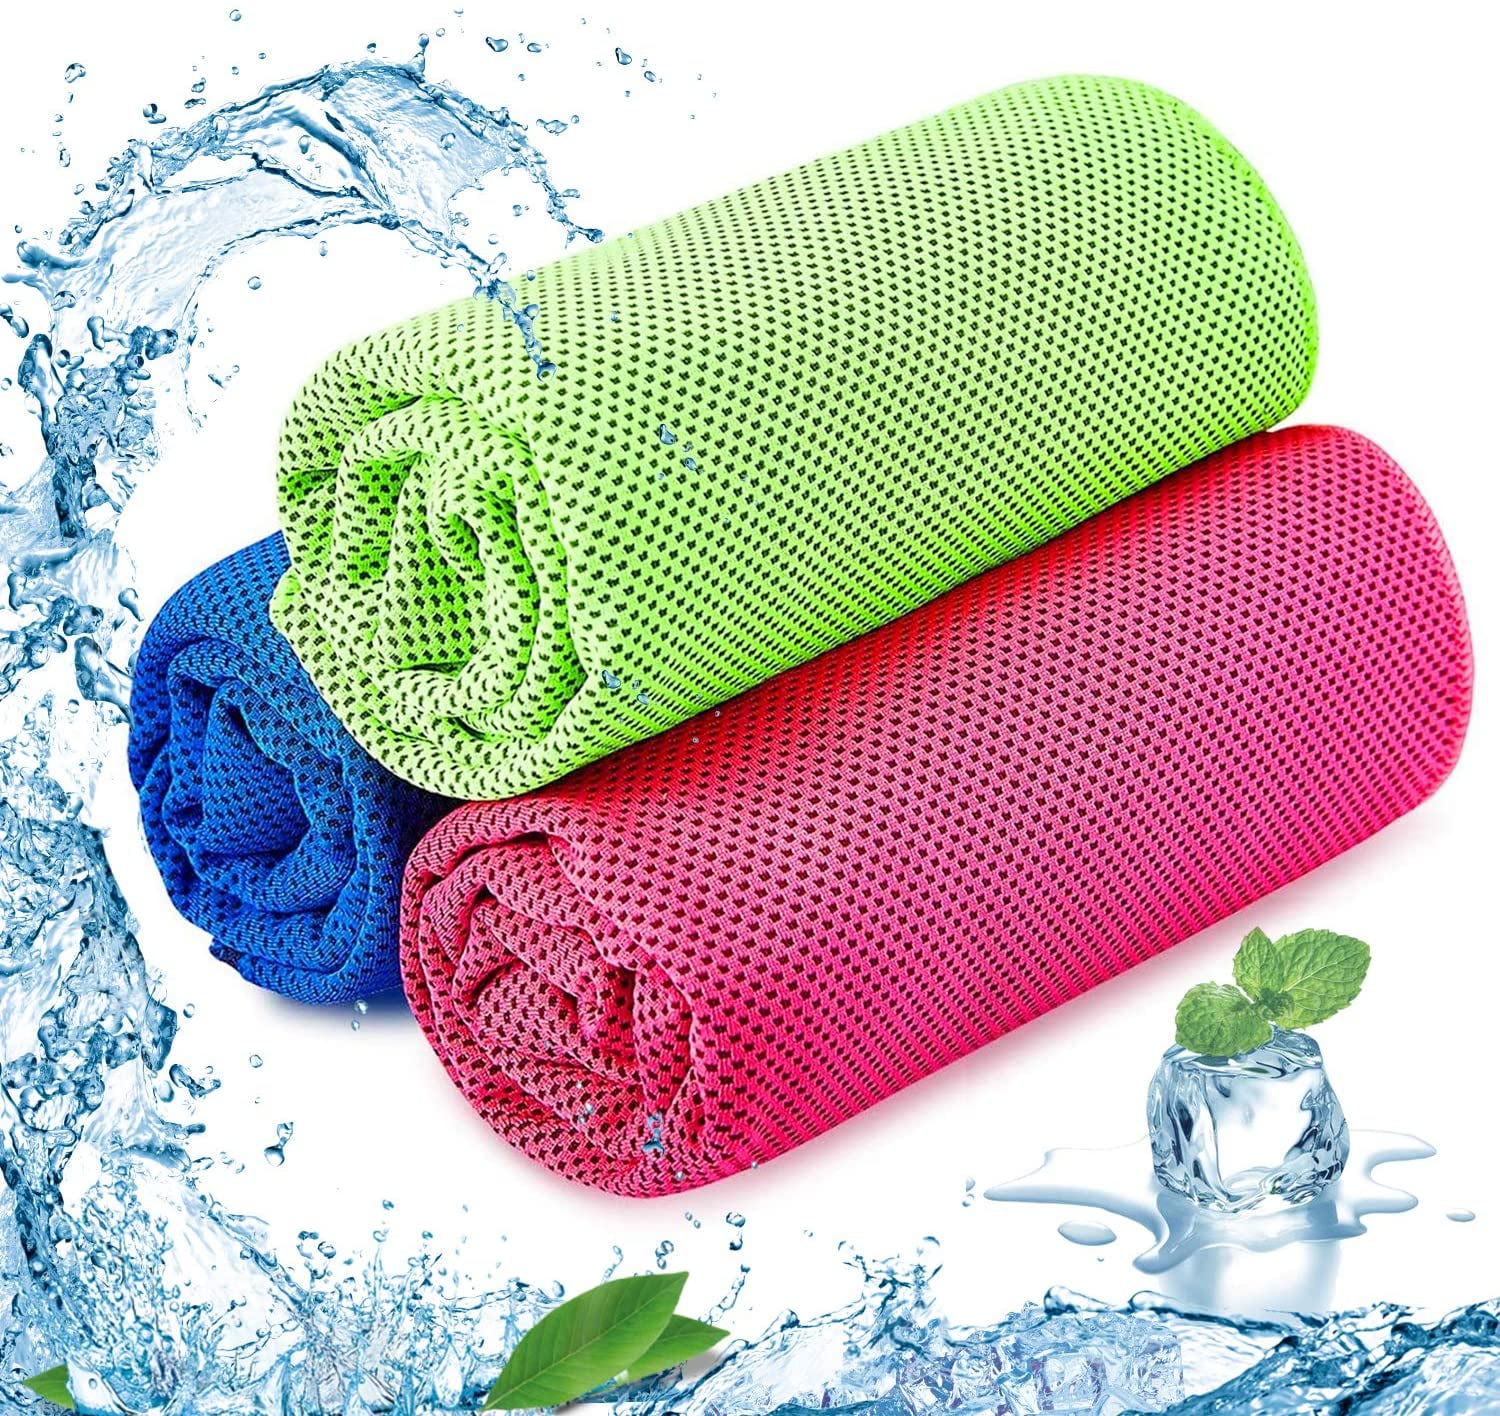 LLCP Cold Feeling Sports Towel Sweat-Absorbing Ice Towel Gym Men And Women Running Wrist Speed Cooling Towel,Light Breathable Multi-Functional Quick Dry Towel,Blue